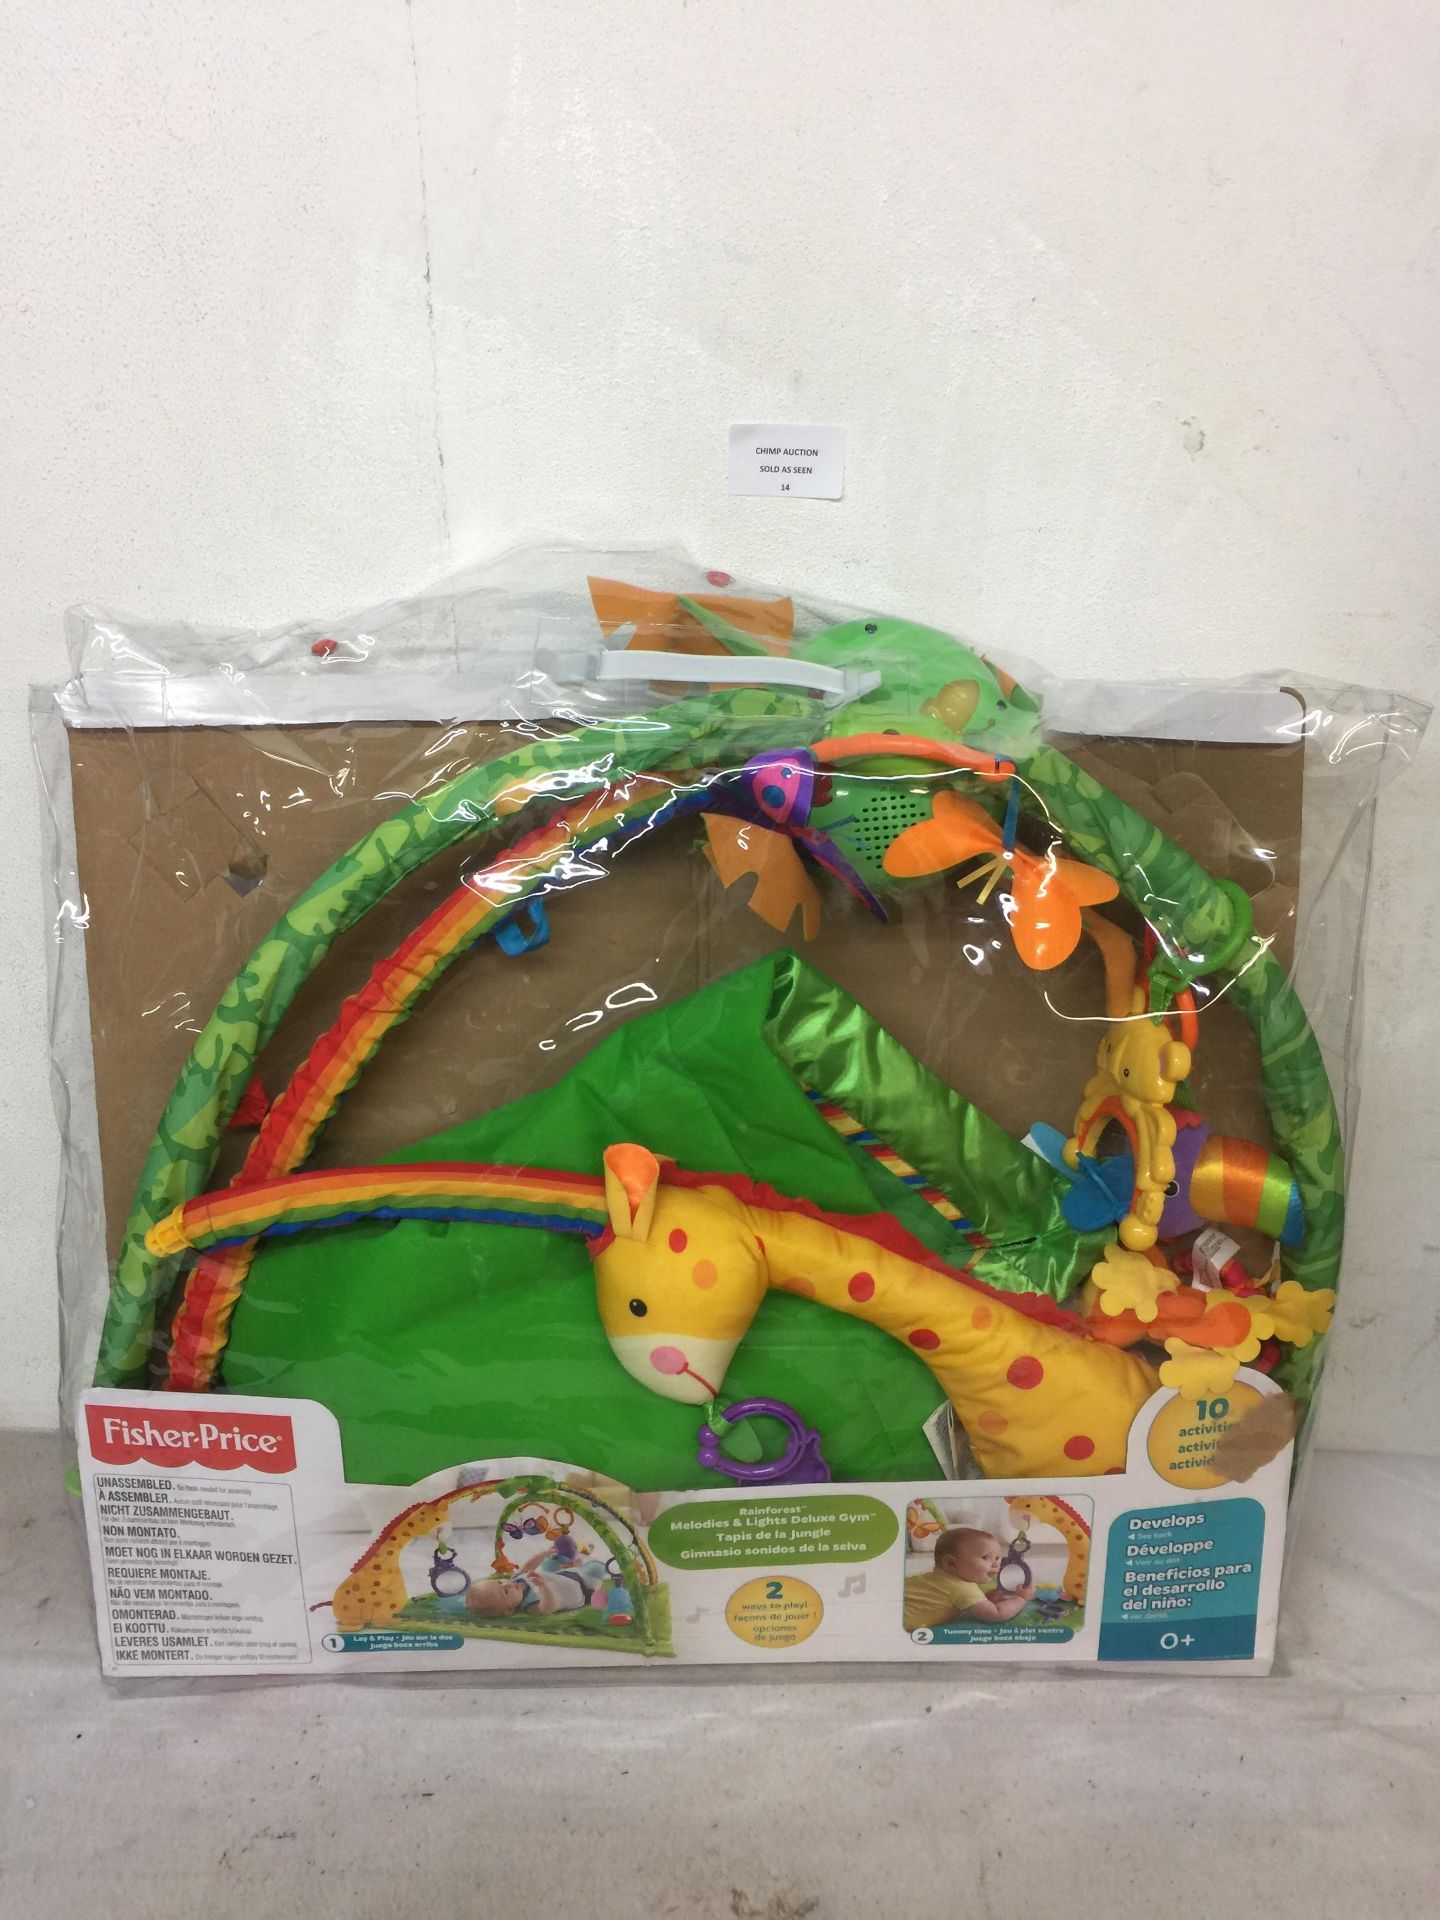 FISHER PRICE MELODIES & LIGHTS DELUXE GYM